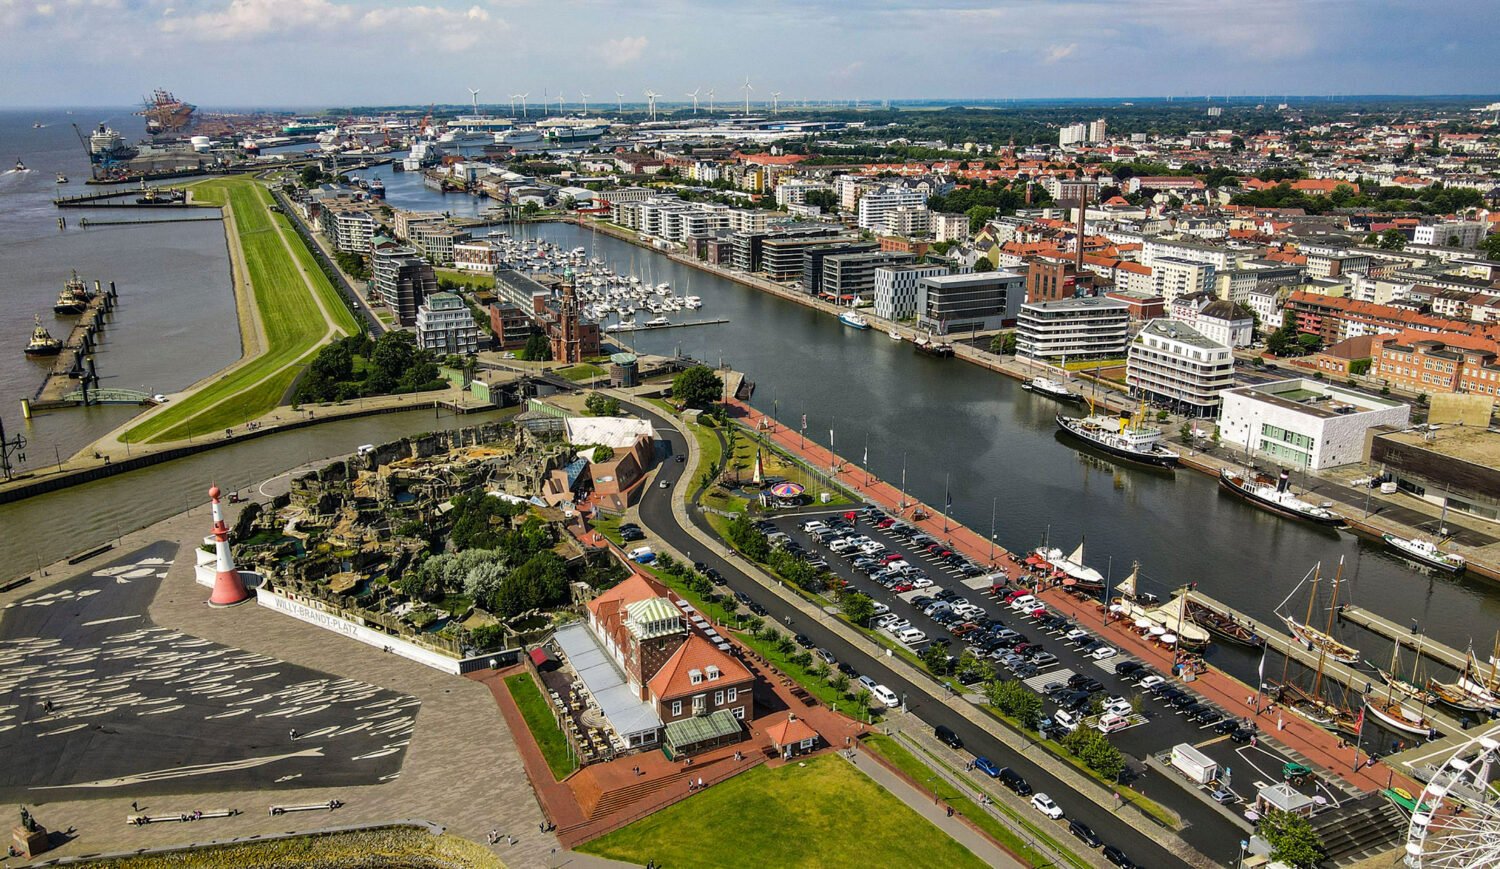 There is a lot to discover - almost one million additional tourists per year are expected through the Havenwelten in Bremerhaven